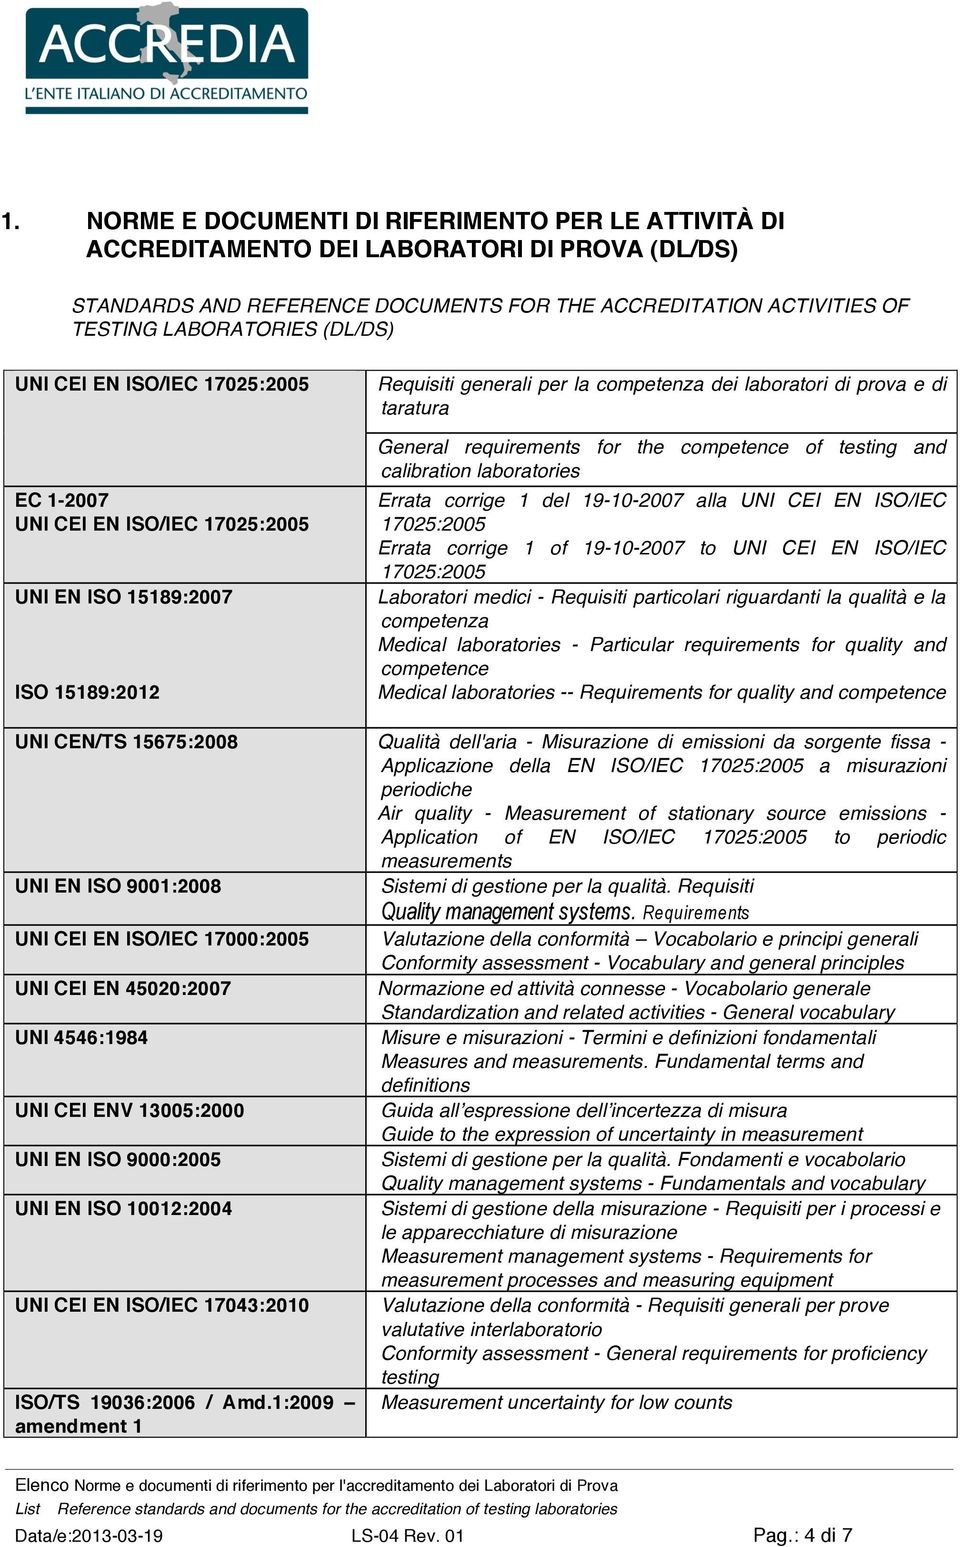 requirements for the competence of testing and calibration laboratories Errata corrige 1 del 19-10-2007 alla UNI CEI EN ISO/IEC 17025:2005 Errata corrige 1 of 19-10-2007 to UNI CEI EN ISO/IEC